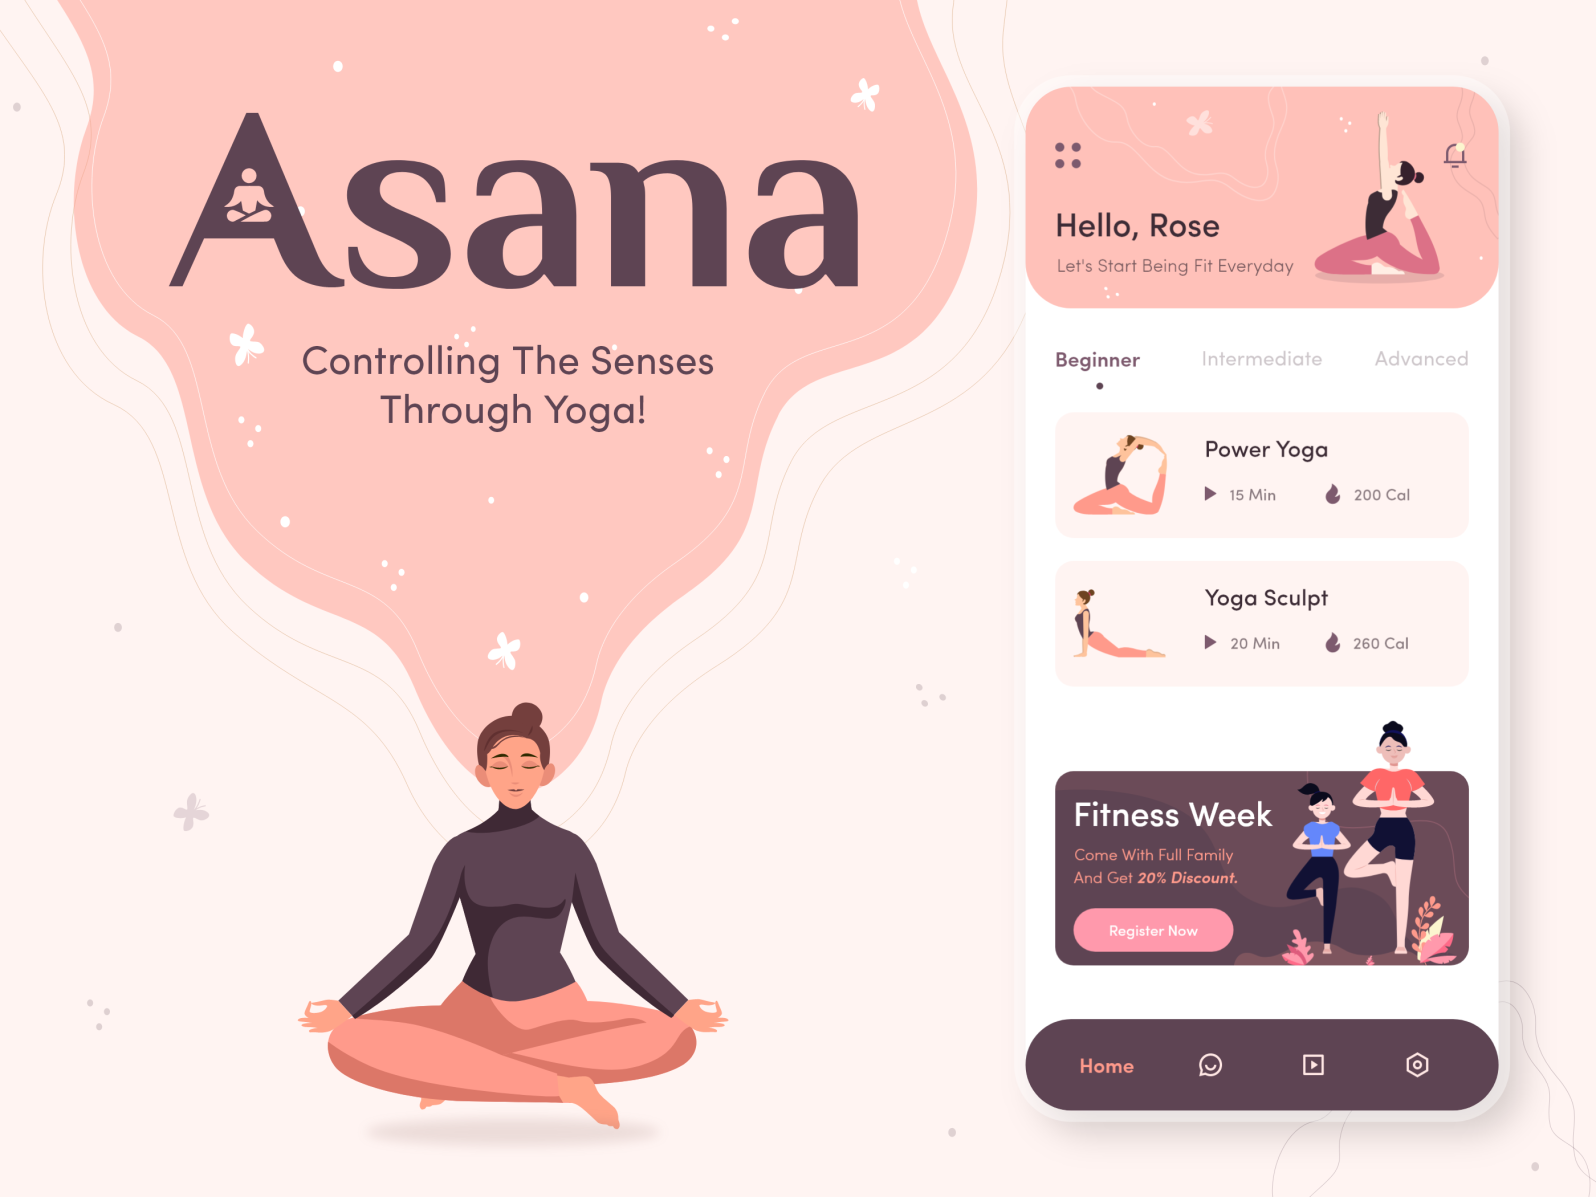 NEW! Yoga Fit on My Fitness App